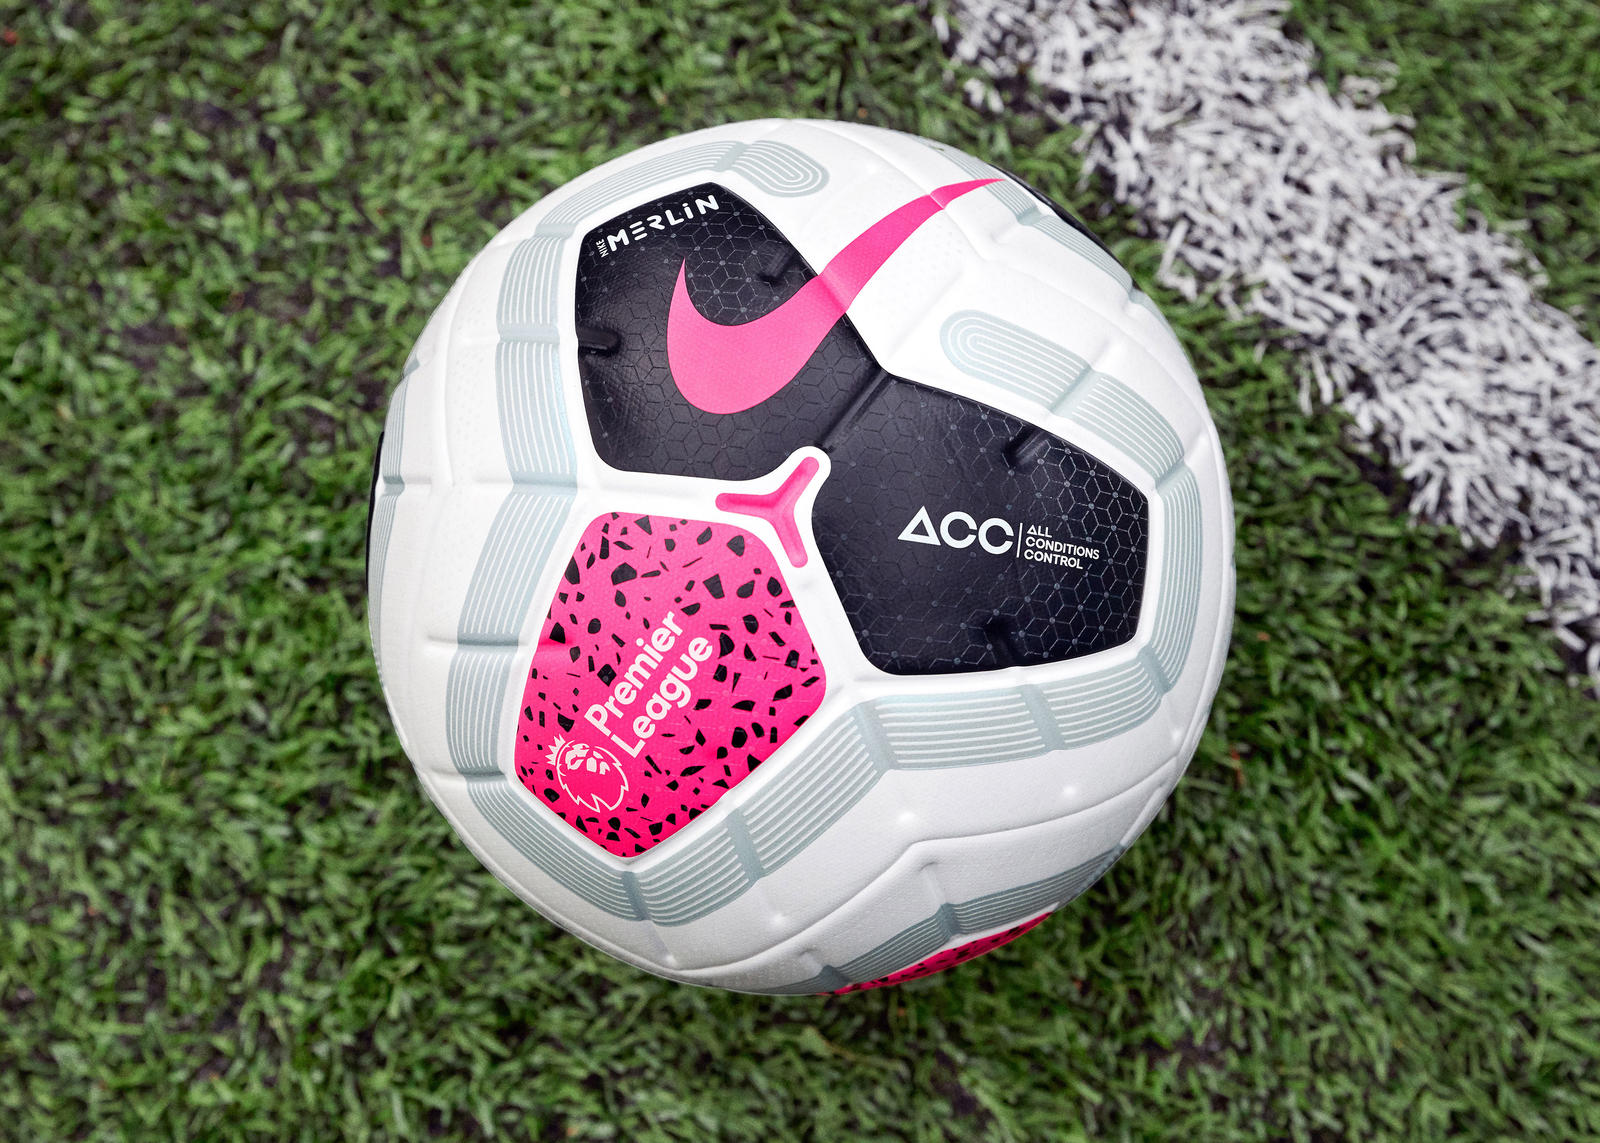 Animado desinfectante Espíritu The Premier League will play with a special Nike Merlin football in 2019-20!